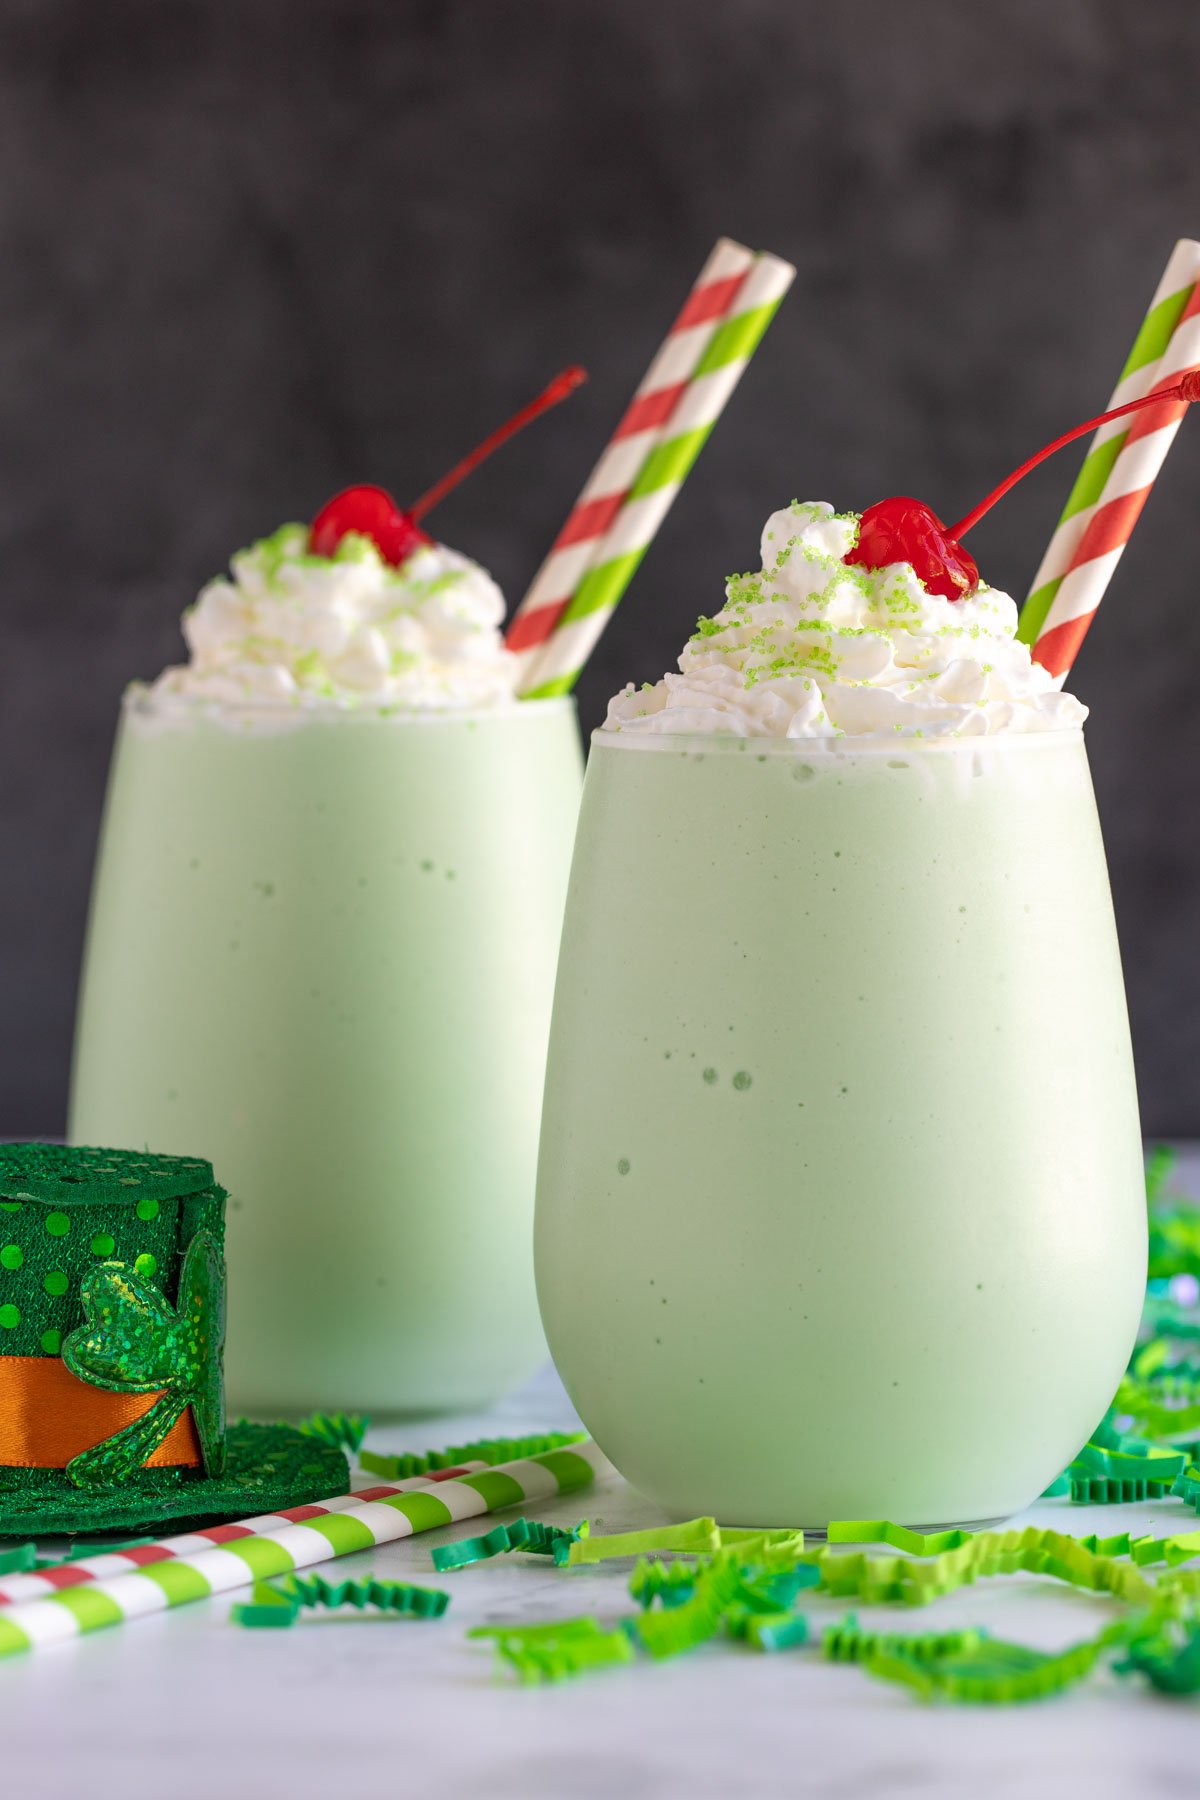 Two boozy shamrock shakes in glasses with red and green striped paper straws.